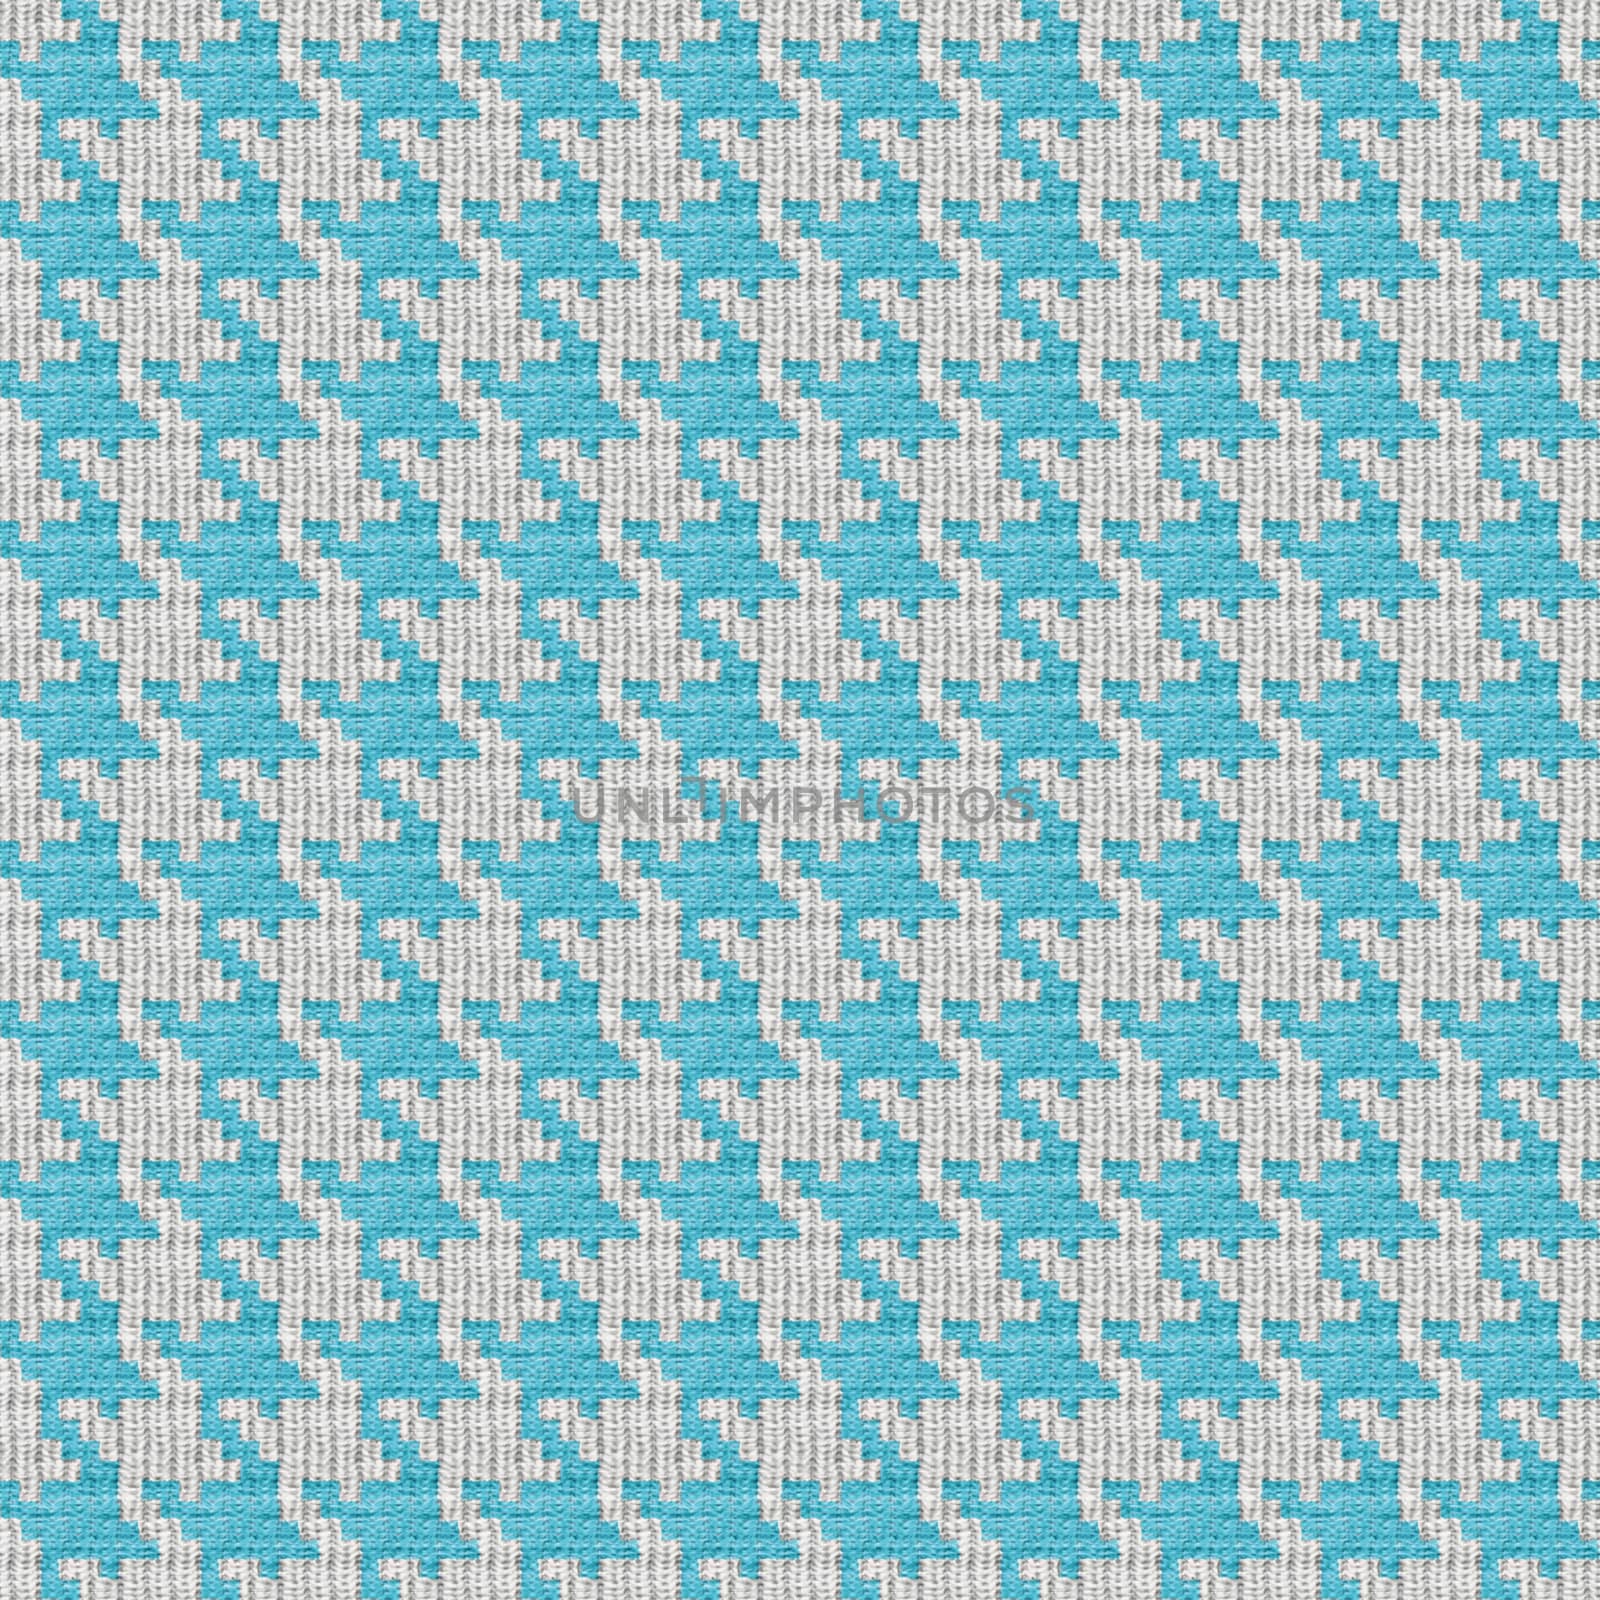 Blue and White Houndstooth by graficallyminded